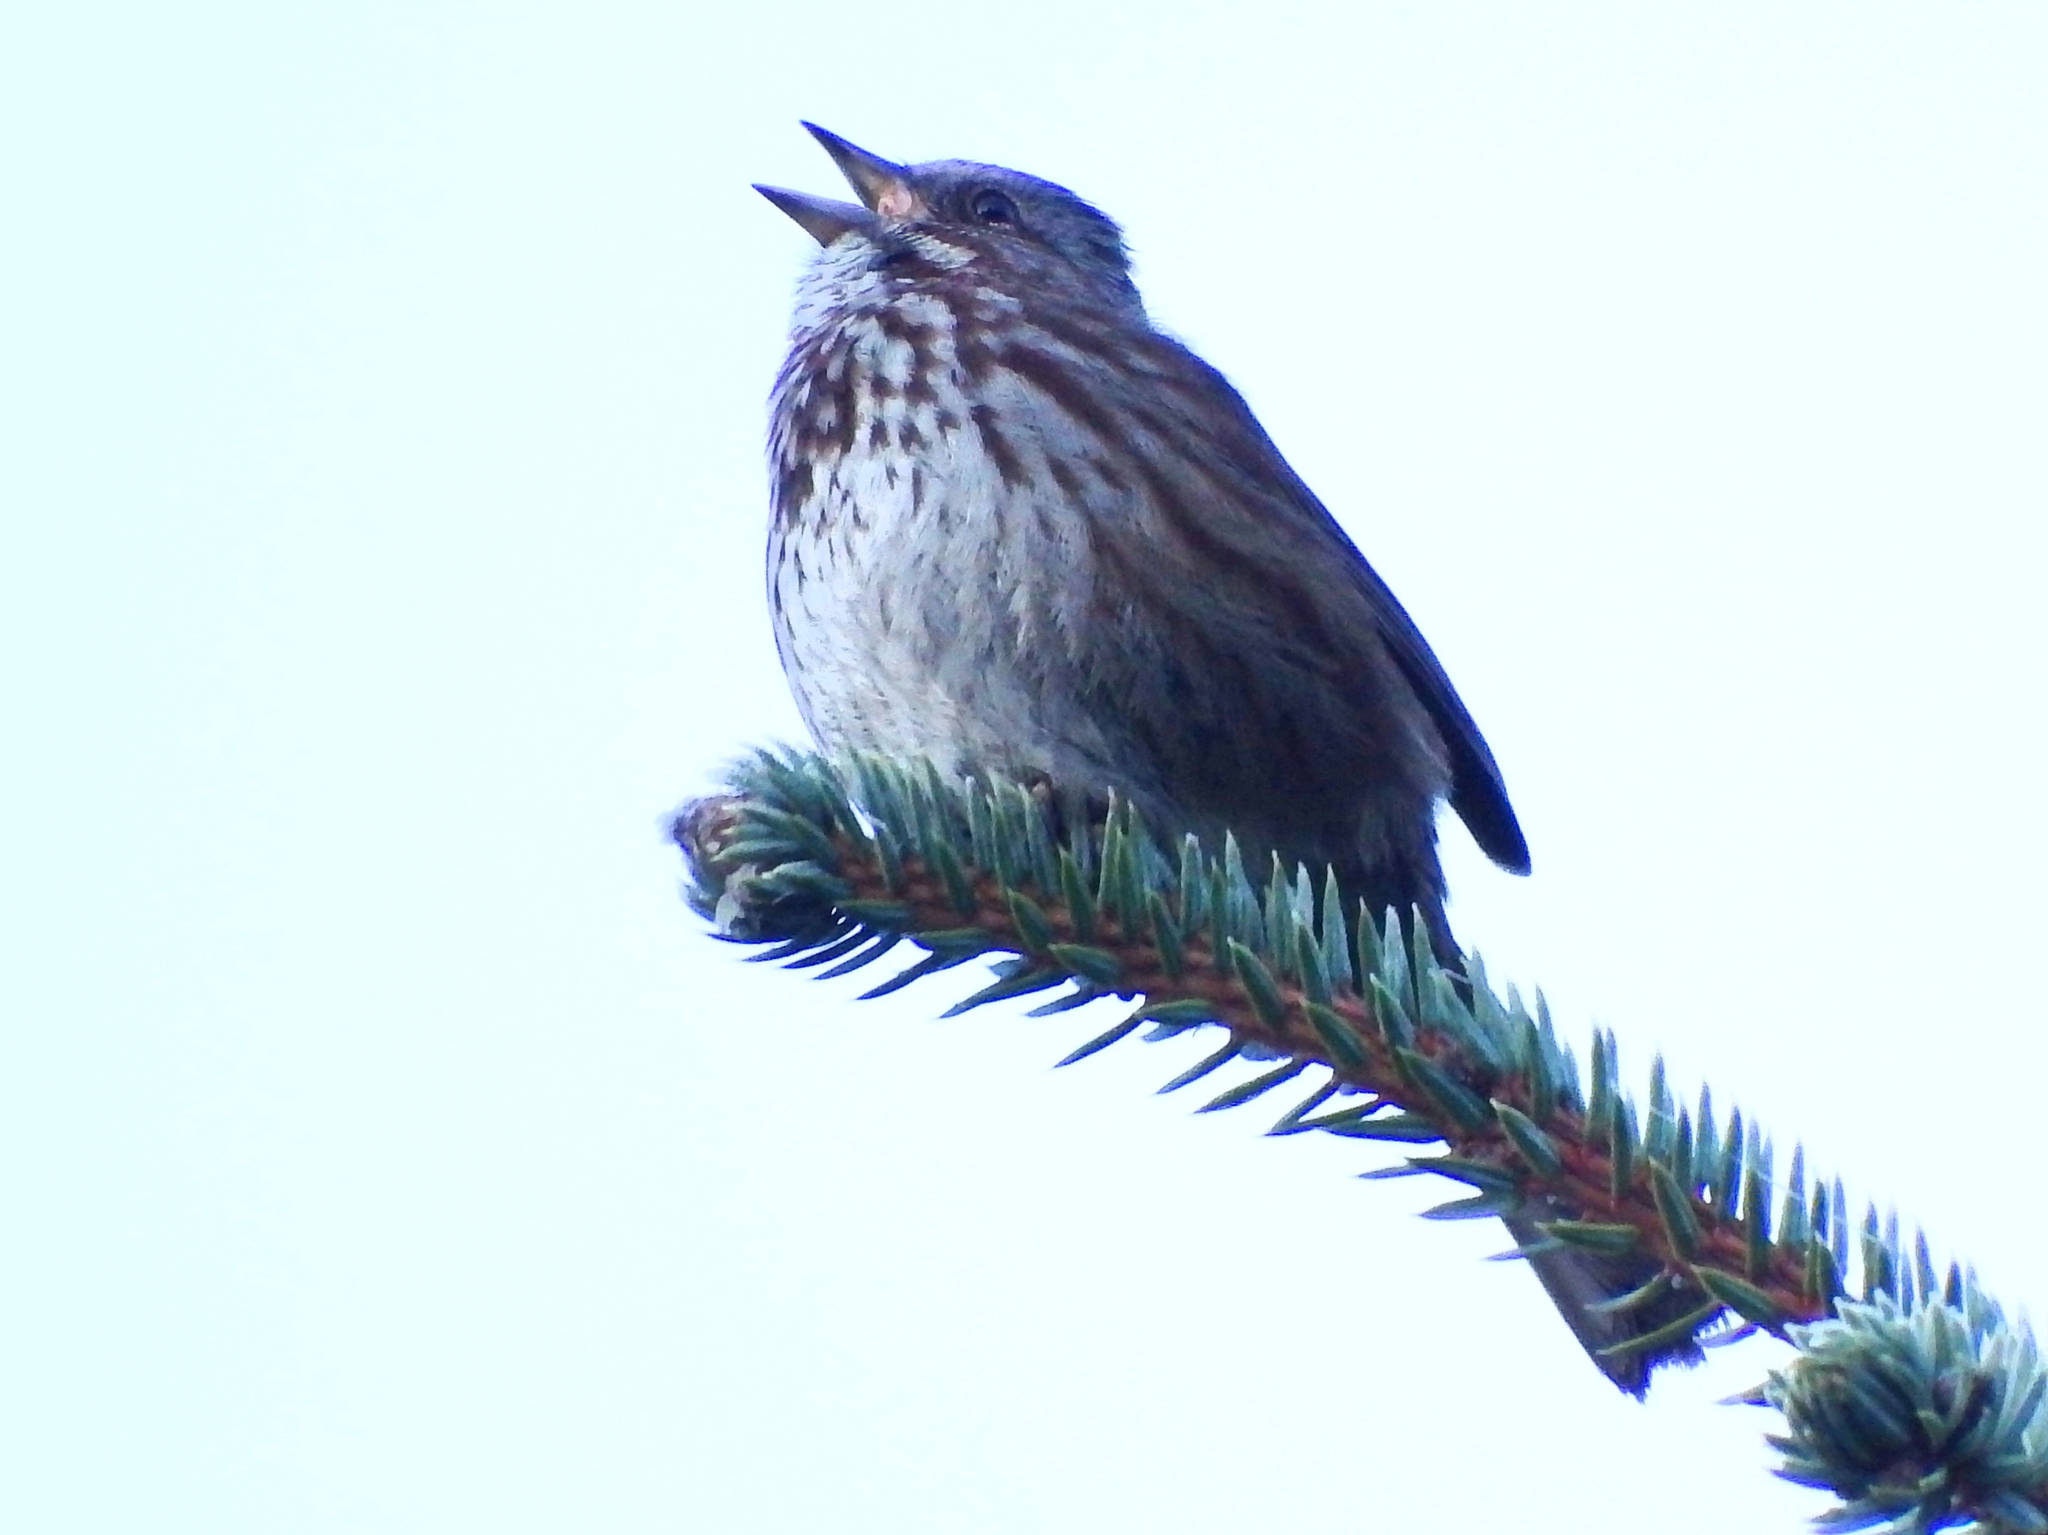 A song sparrow warms up its pipes on March 31, 2019. (Courtesy Photo | Linda Shaw)